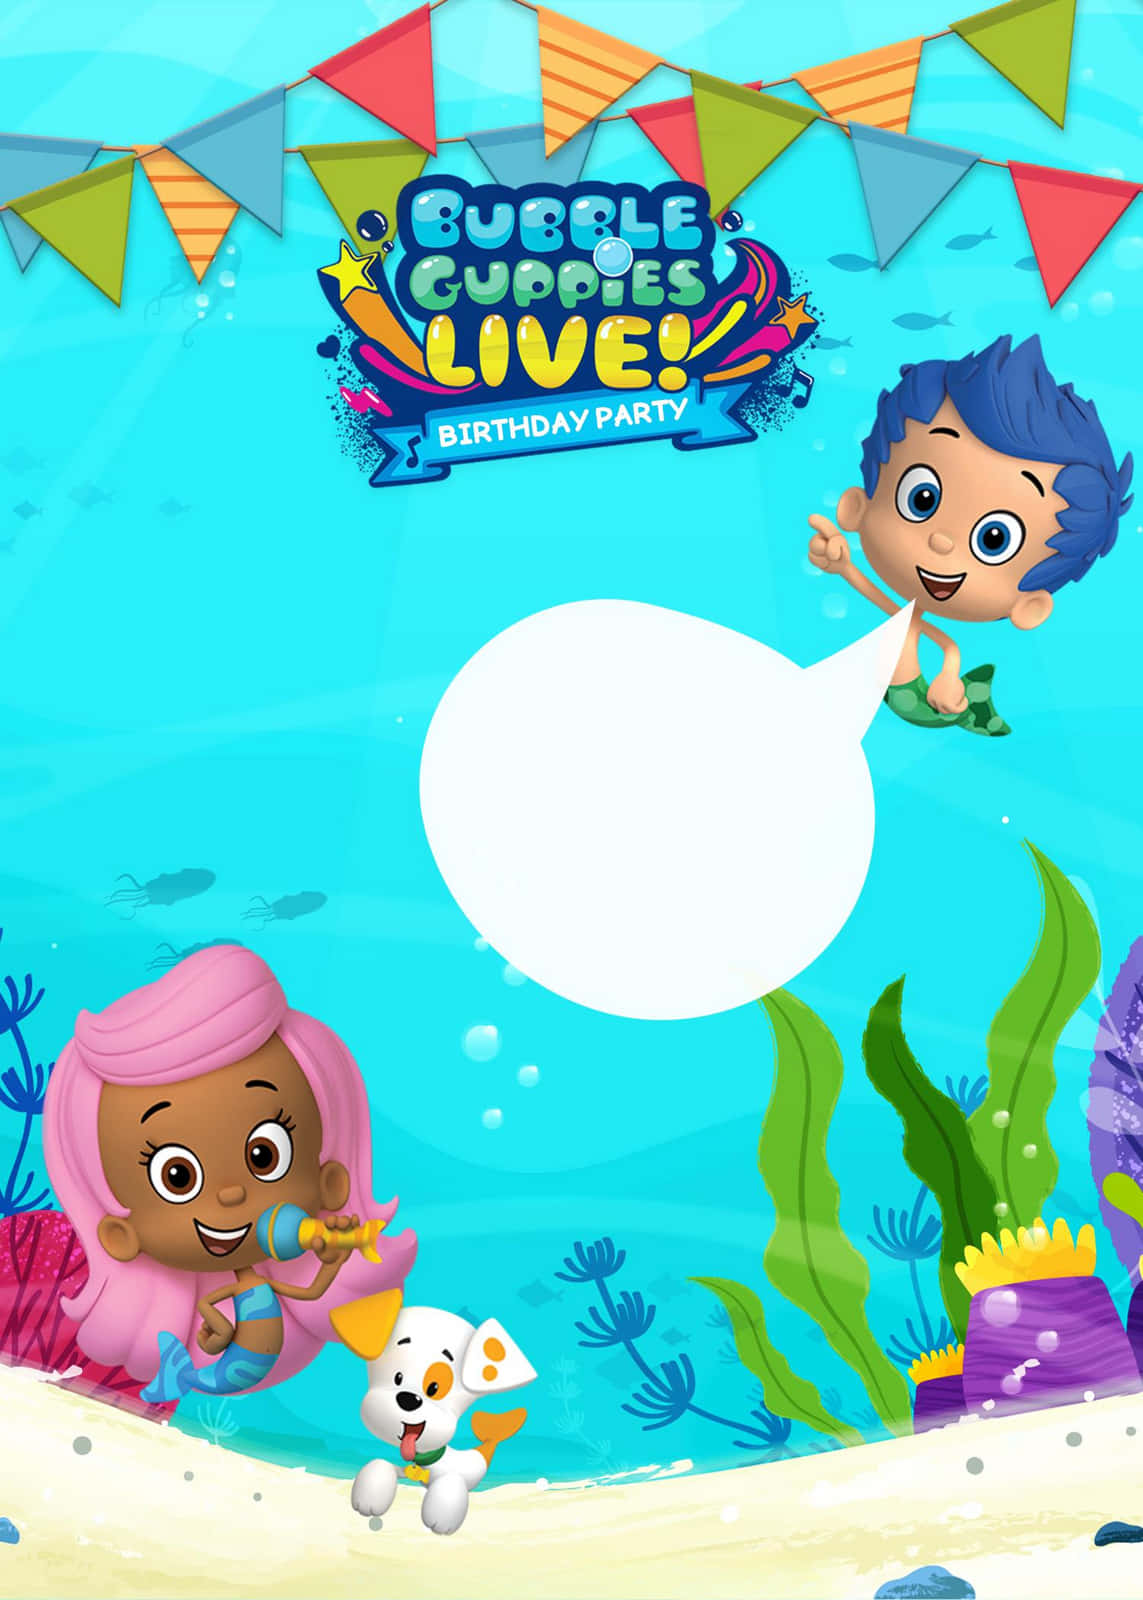 "Dive In, Have Fun With Your Favorite Bubble Guppies Gang!"